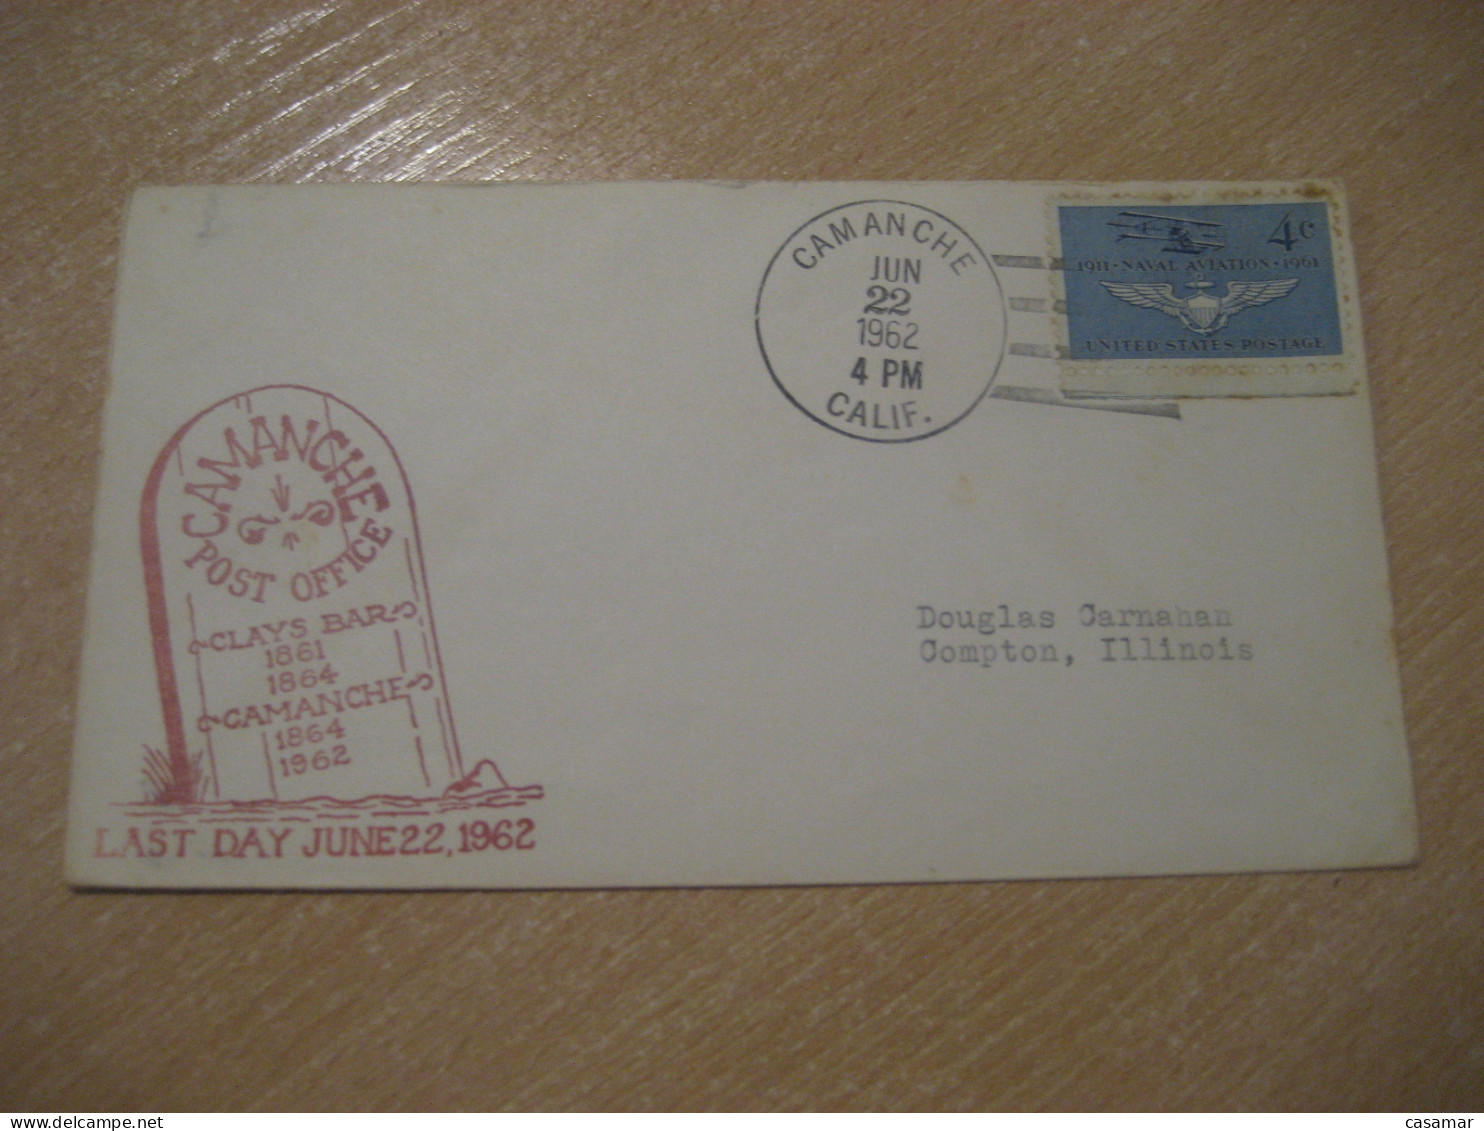 CAMANCHE 1962 Post Office Clays Bar Last Day American Indians Indian Cancel Cover USA Indigenous Native History - Indianer